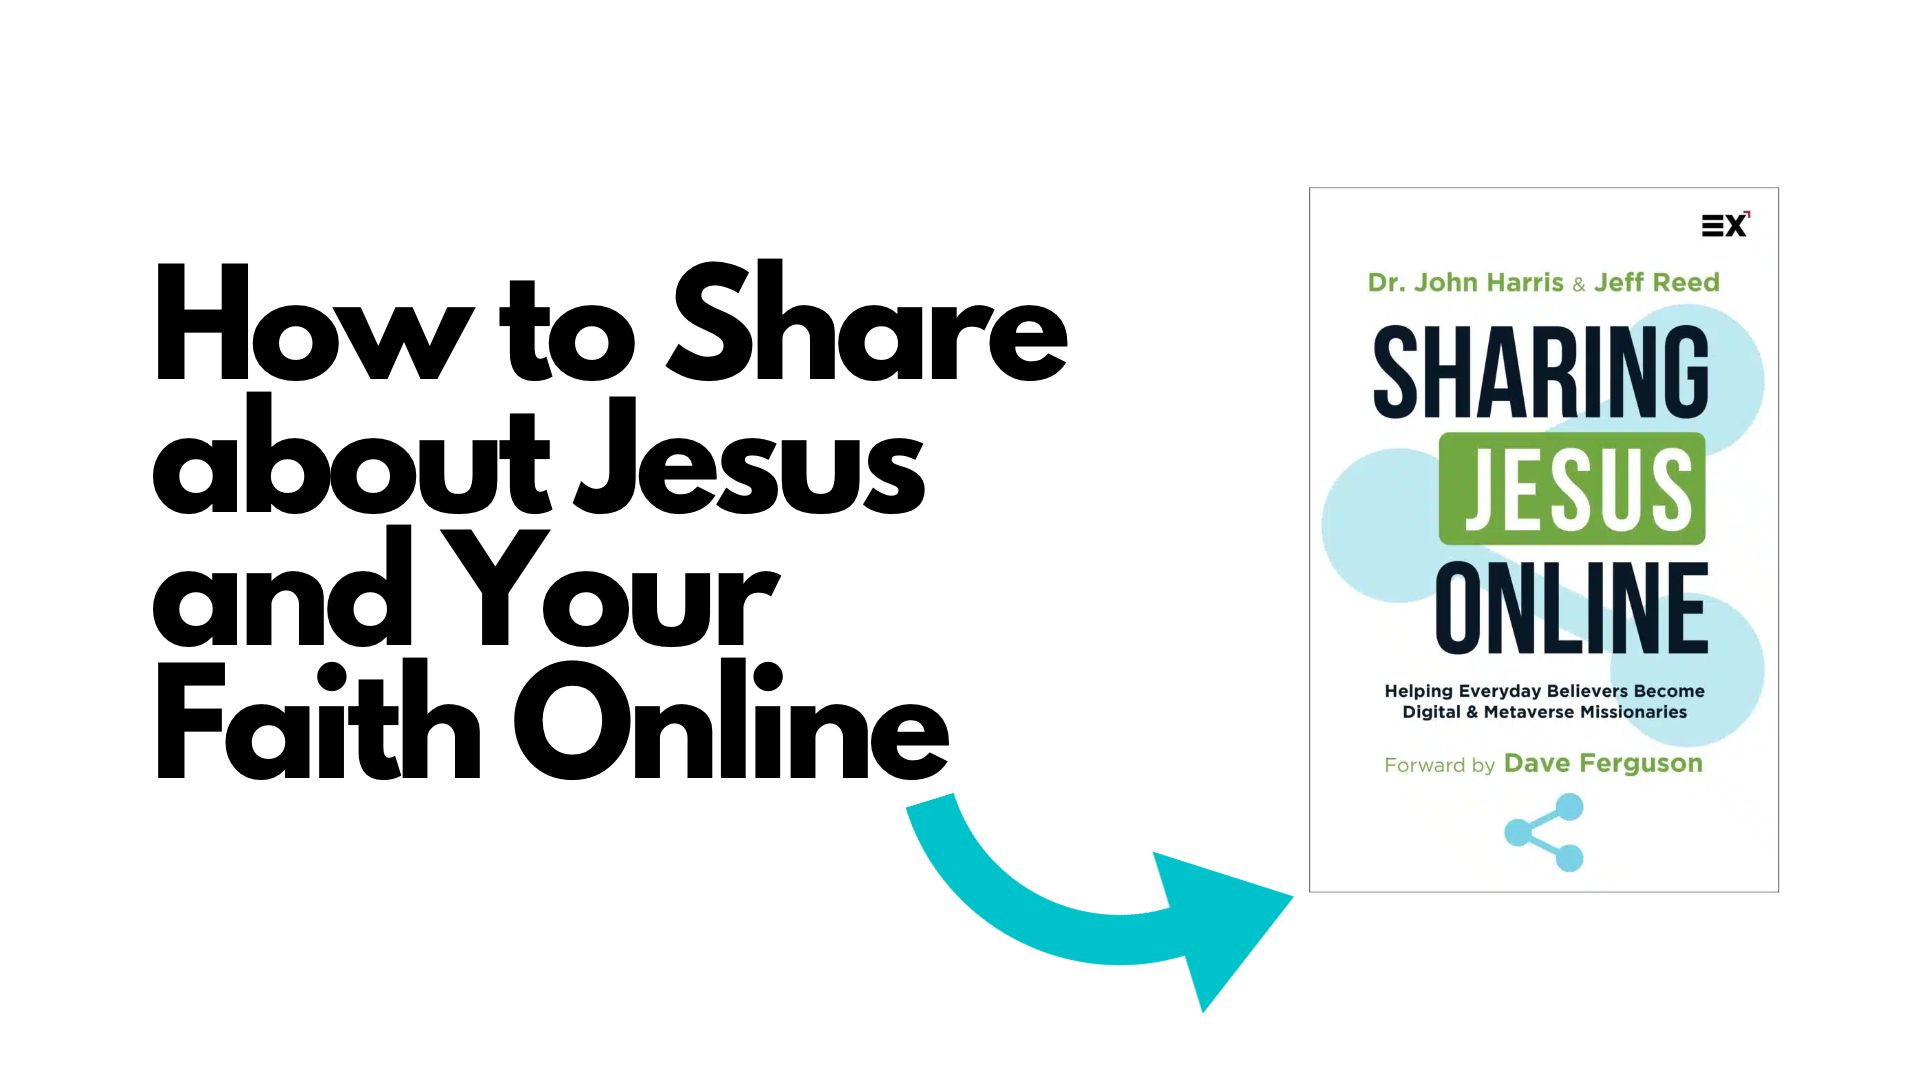 How to Share about Jesus and Your Faith Online